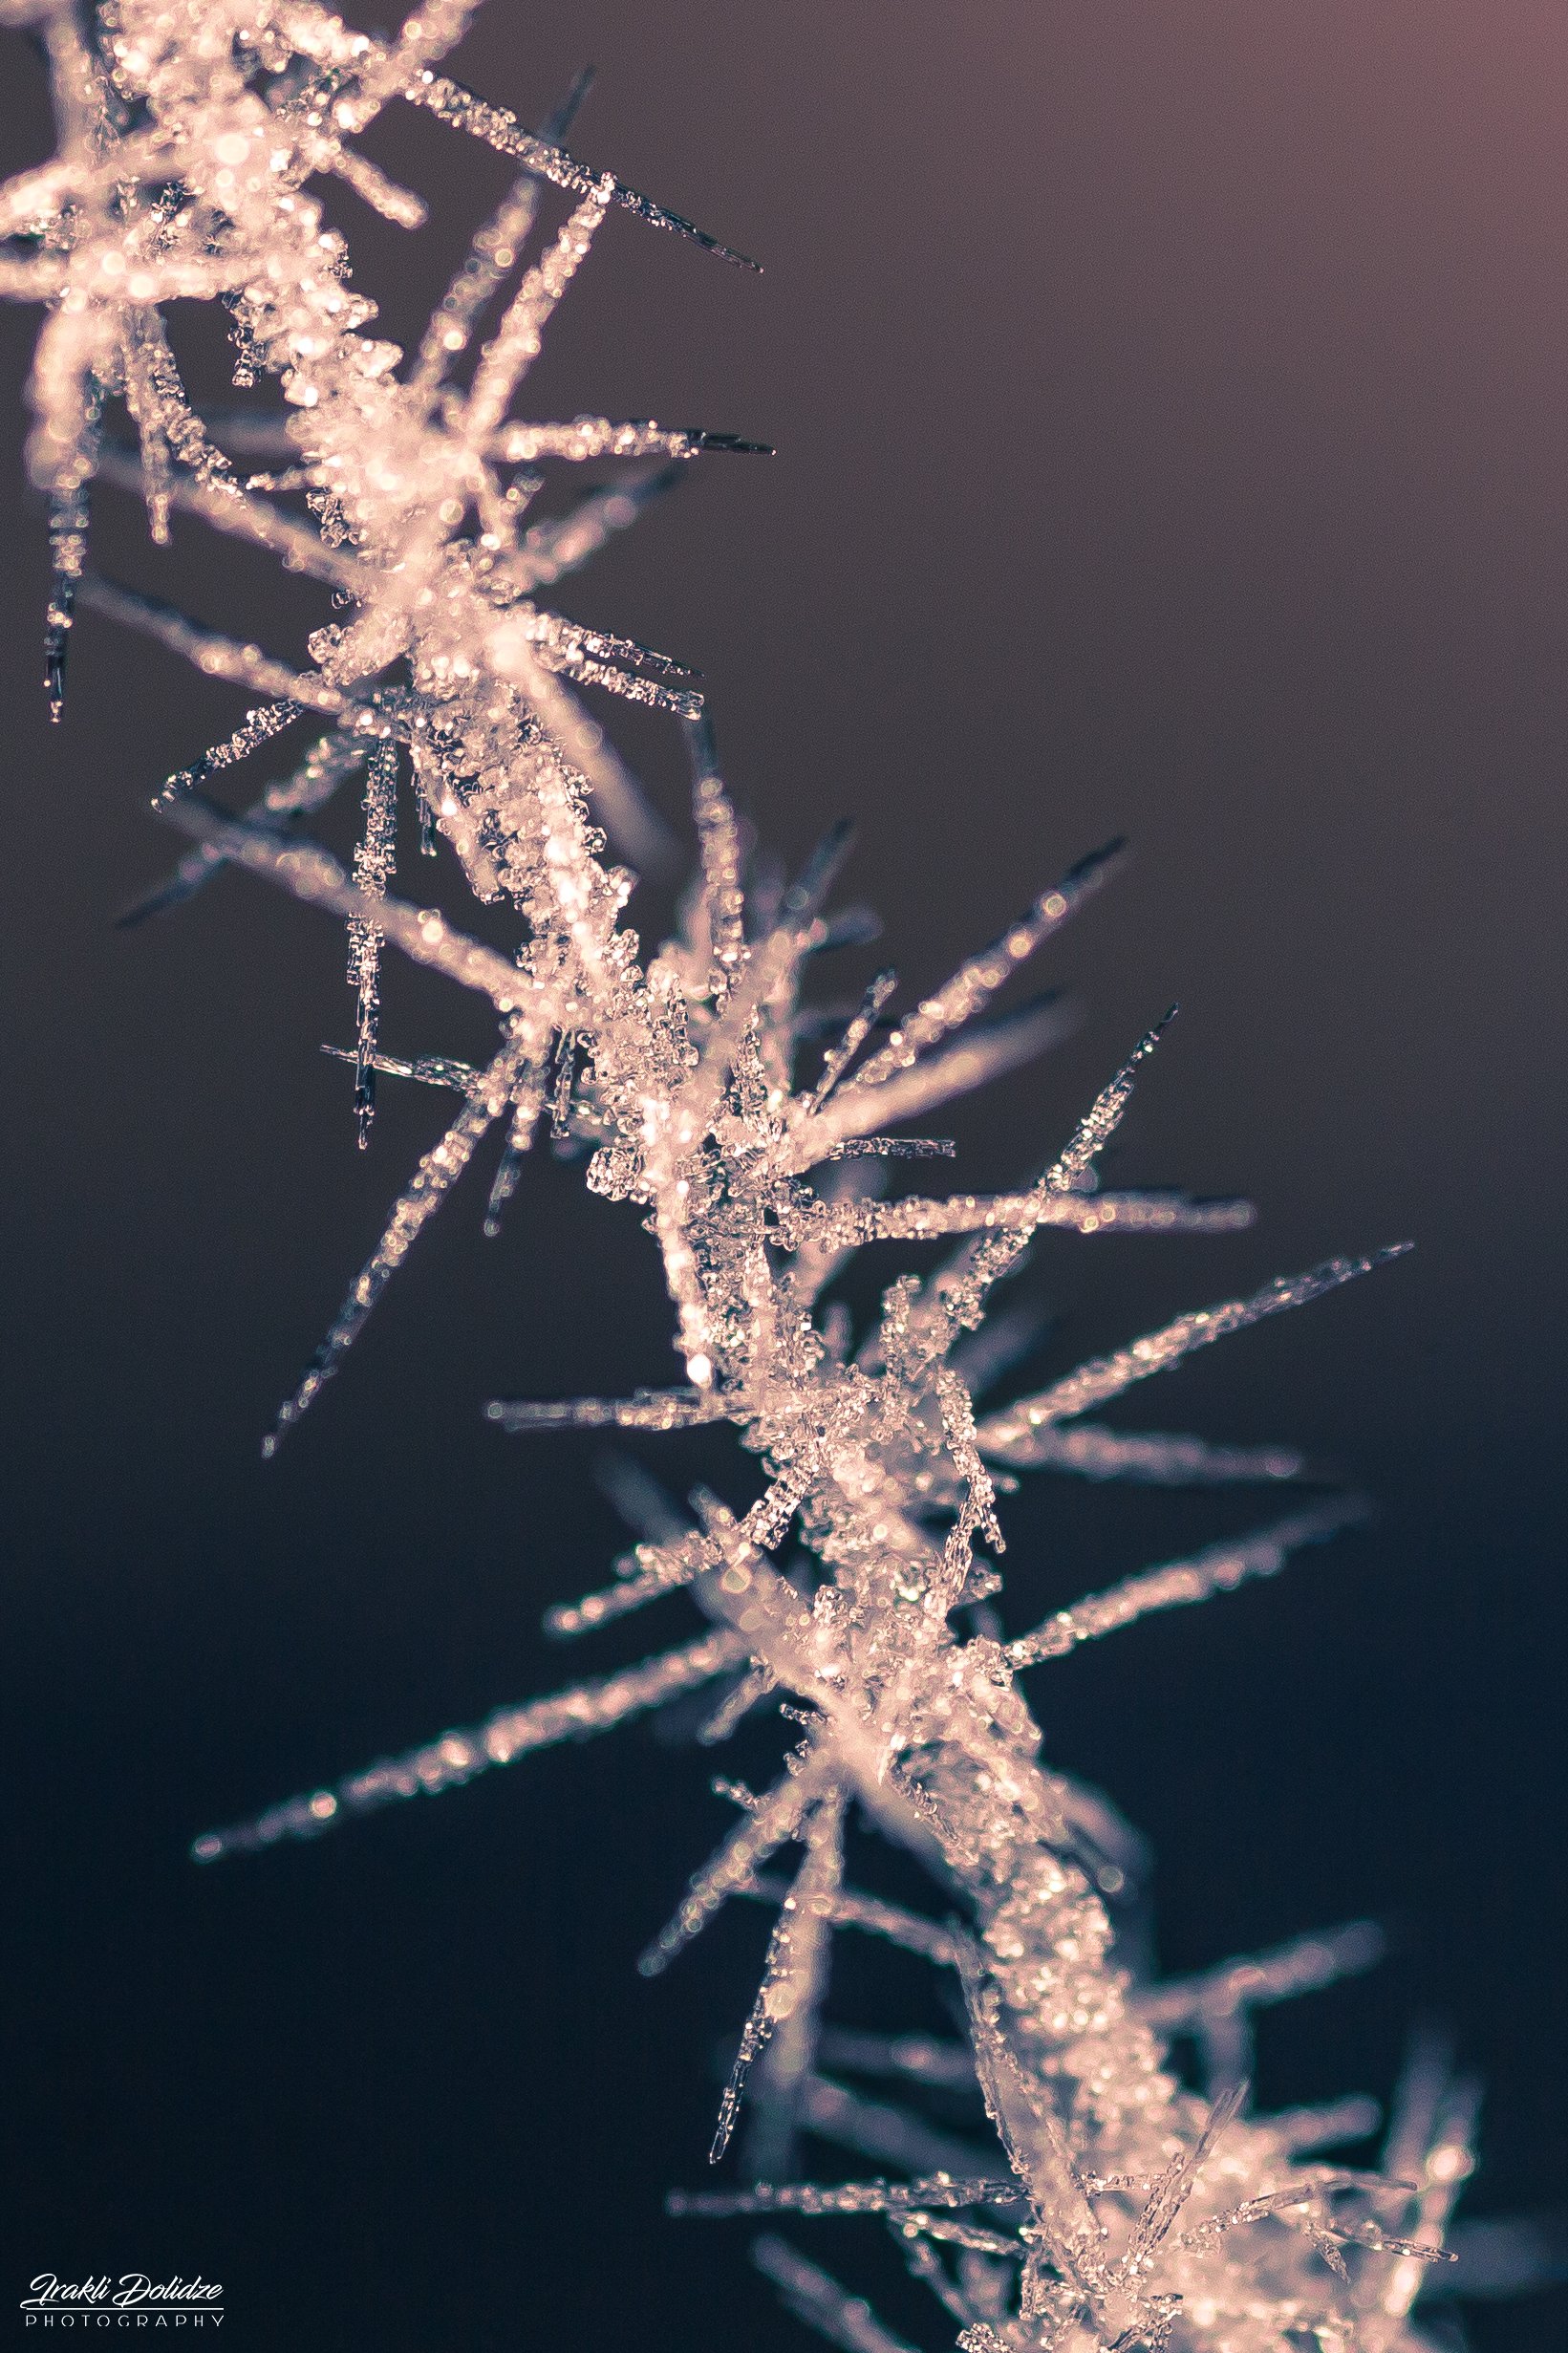 macro, crystals, water, ice, photography, cold, frozen, weather, winter, ირაკლი დოლიძე